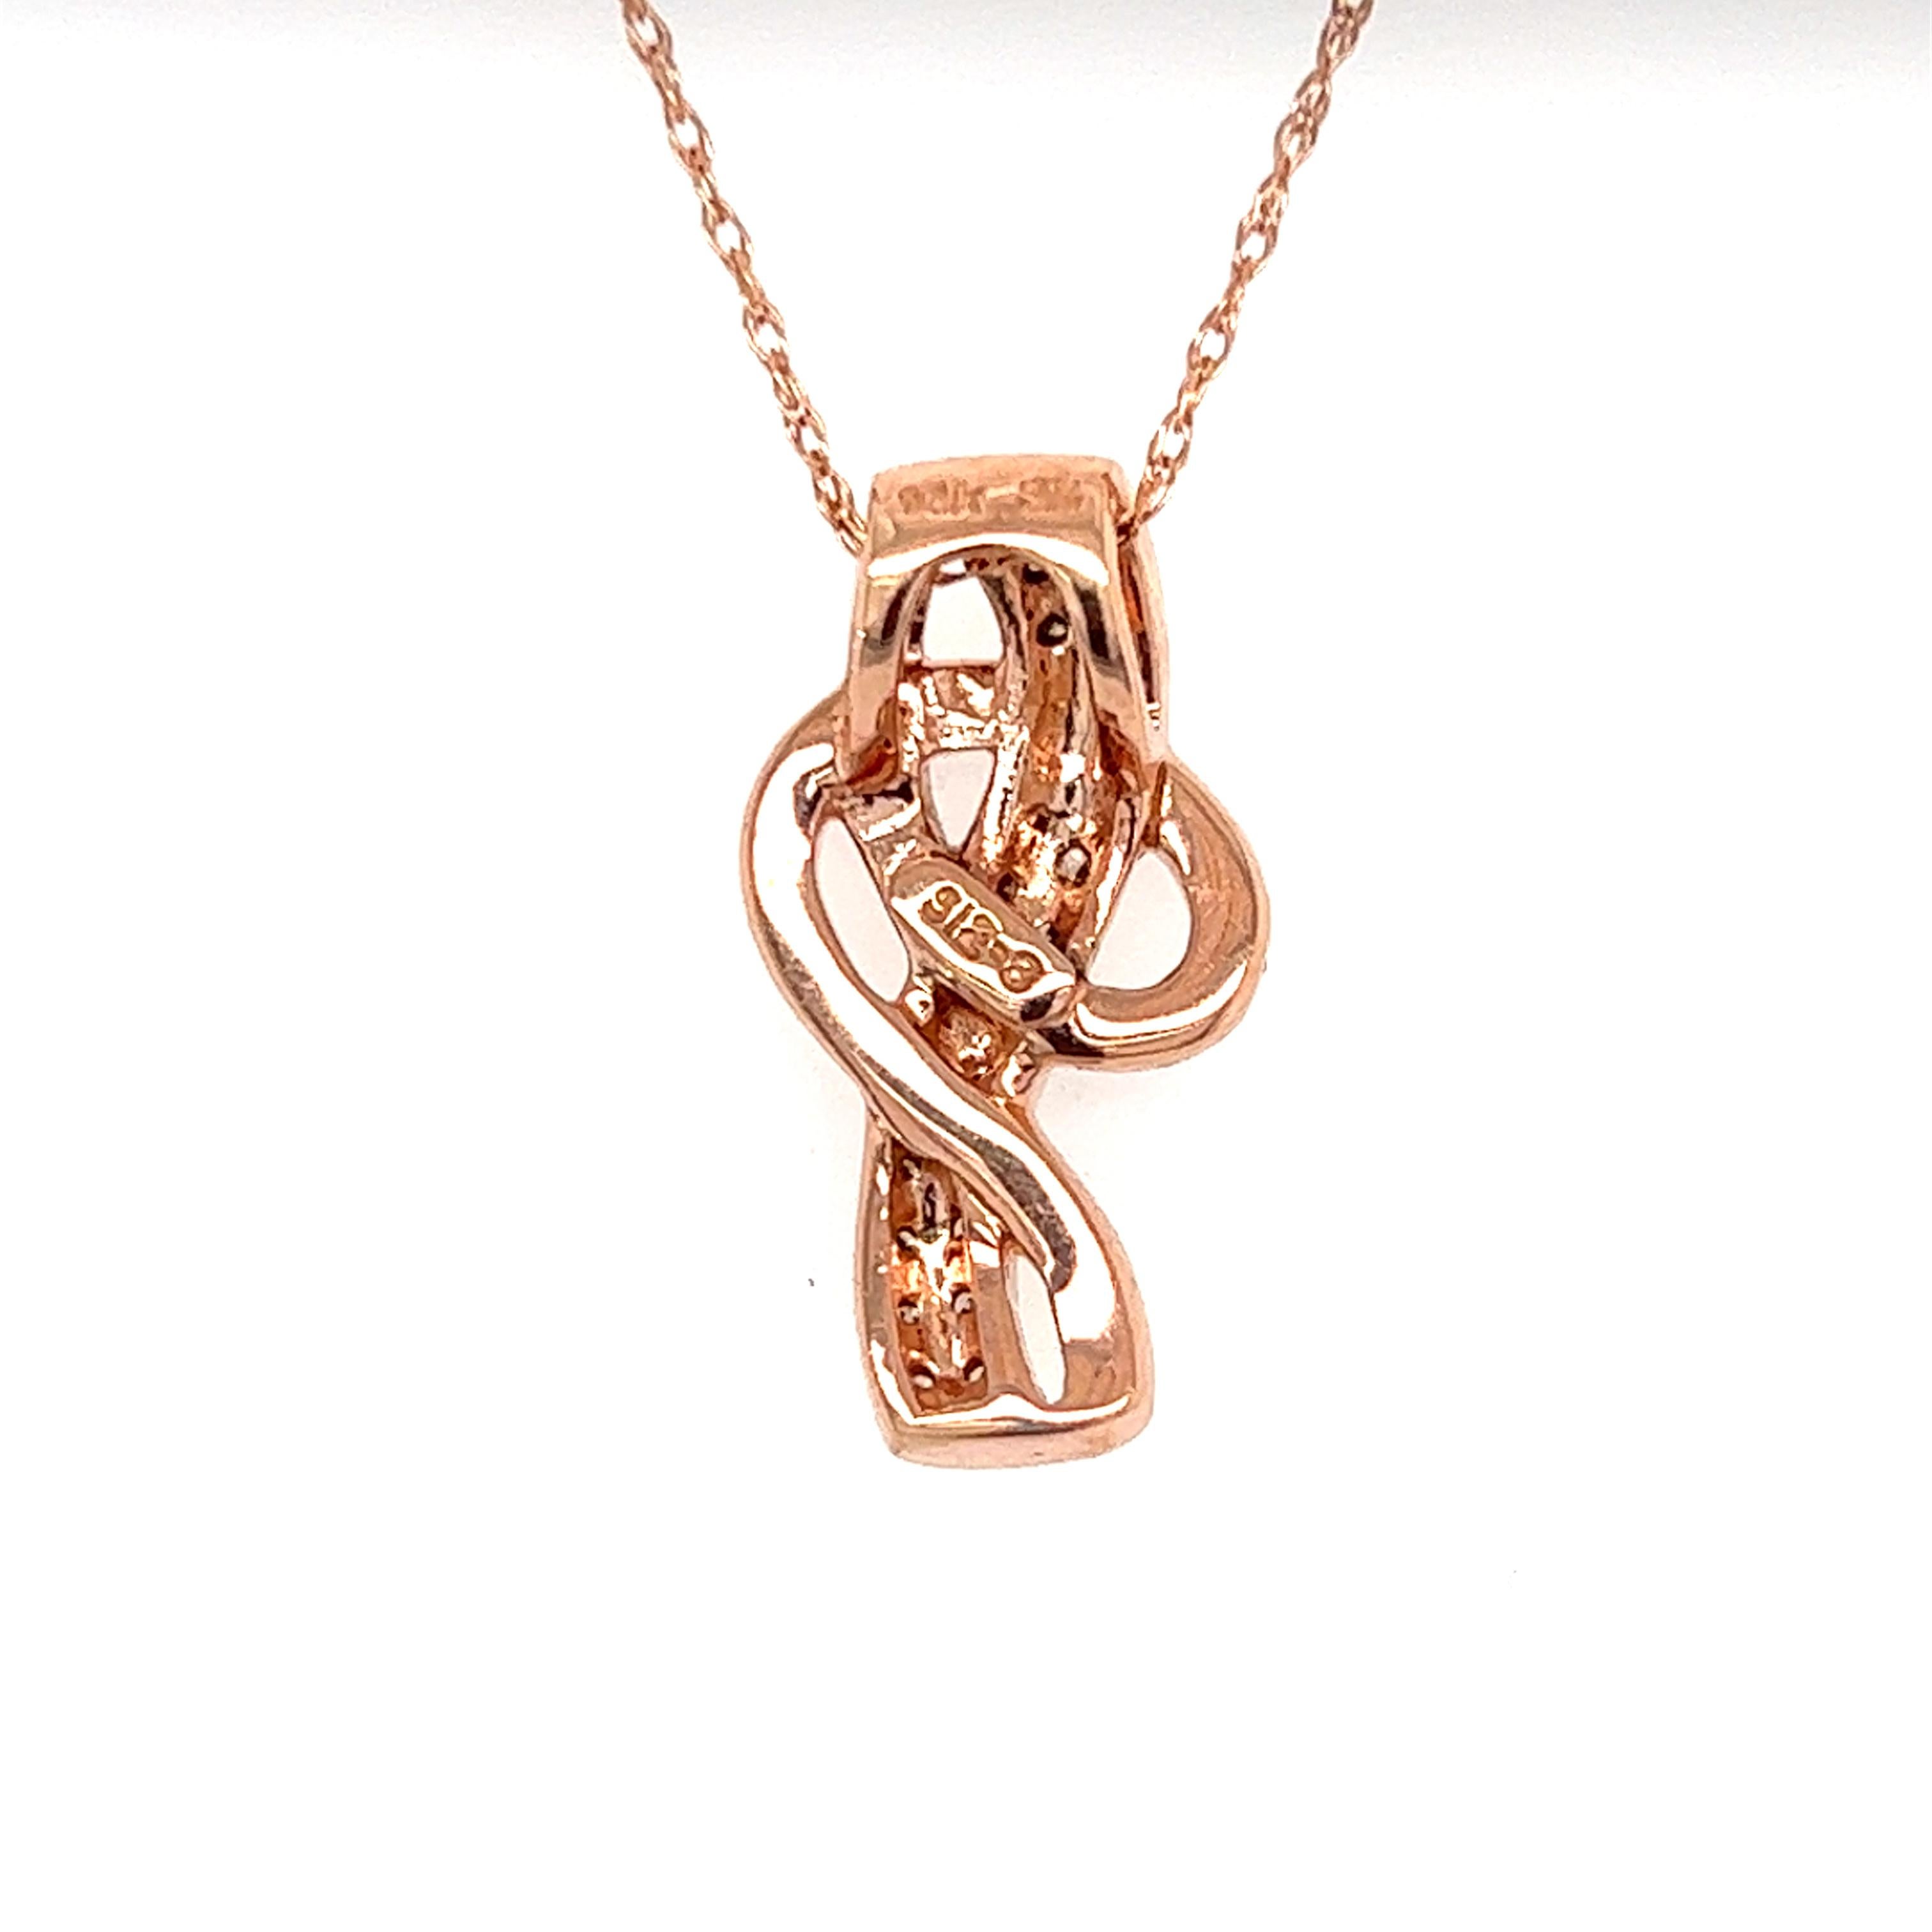 One (1) 14 karat rose gold chocolate and vanilla diamond swirl necklace pendant by Le Vian featuring fourteen (14) round brilliant-cut white diamonds being of the H-I color grade range and of the SI2-I1 clarity grade range and featuring twenty-four